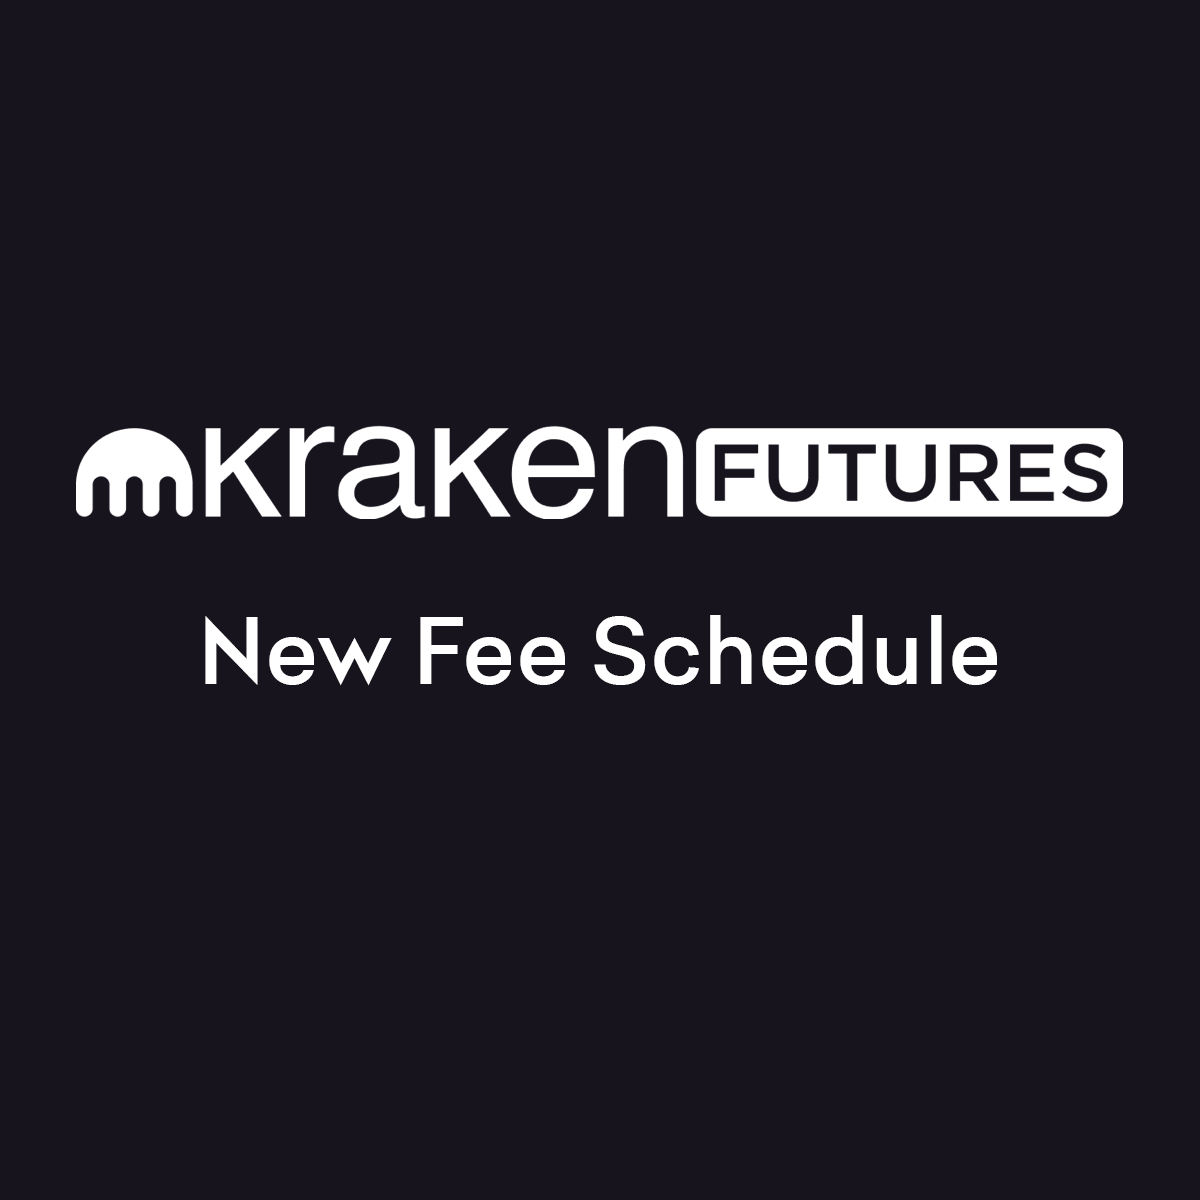 Kraken Futures Cuts Taker Fees Across the Board for All Traders